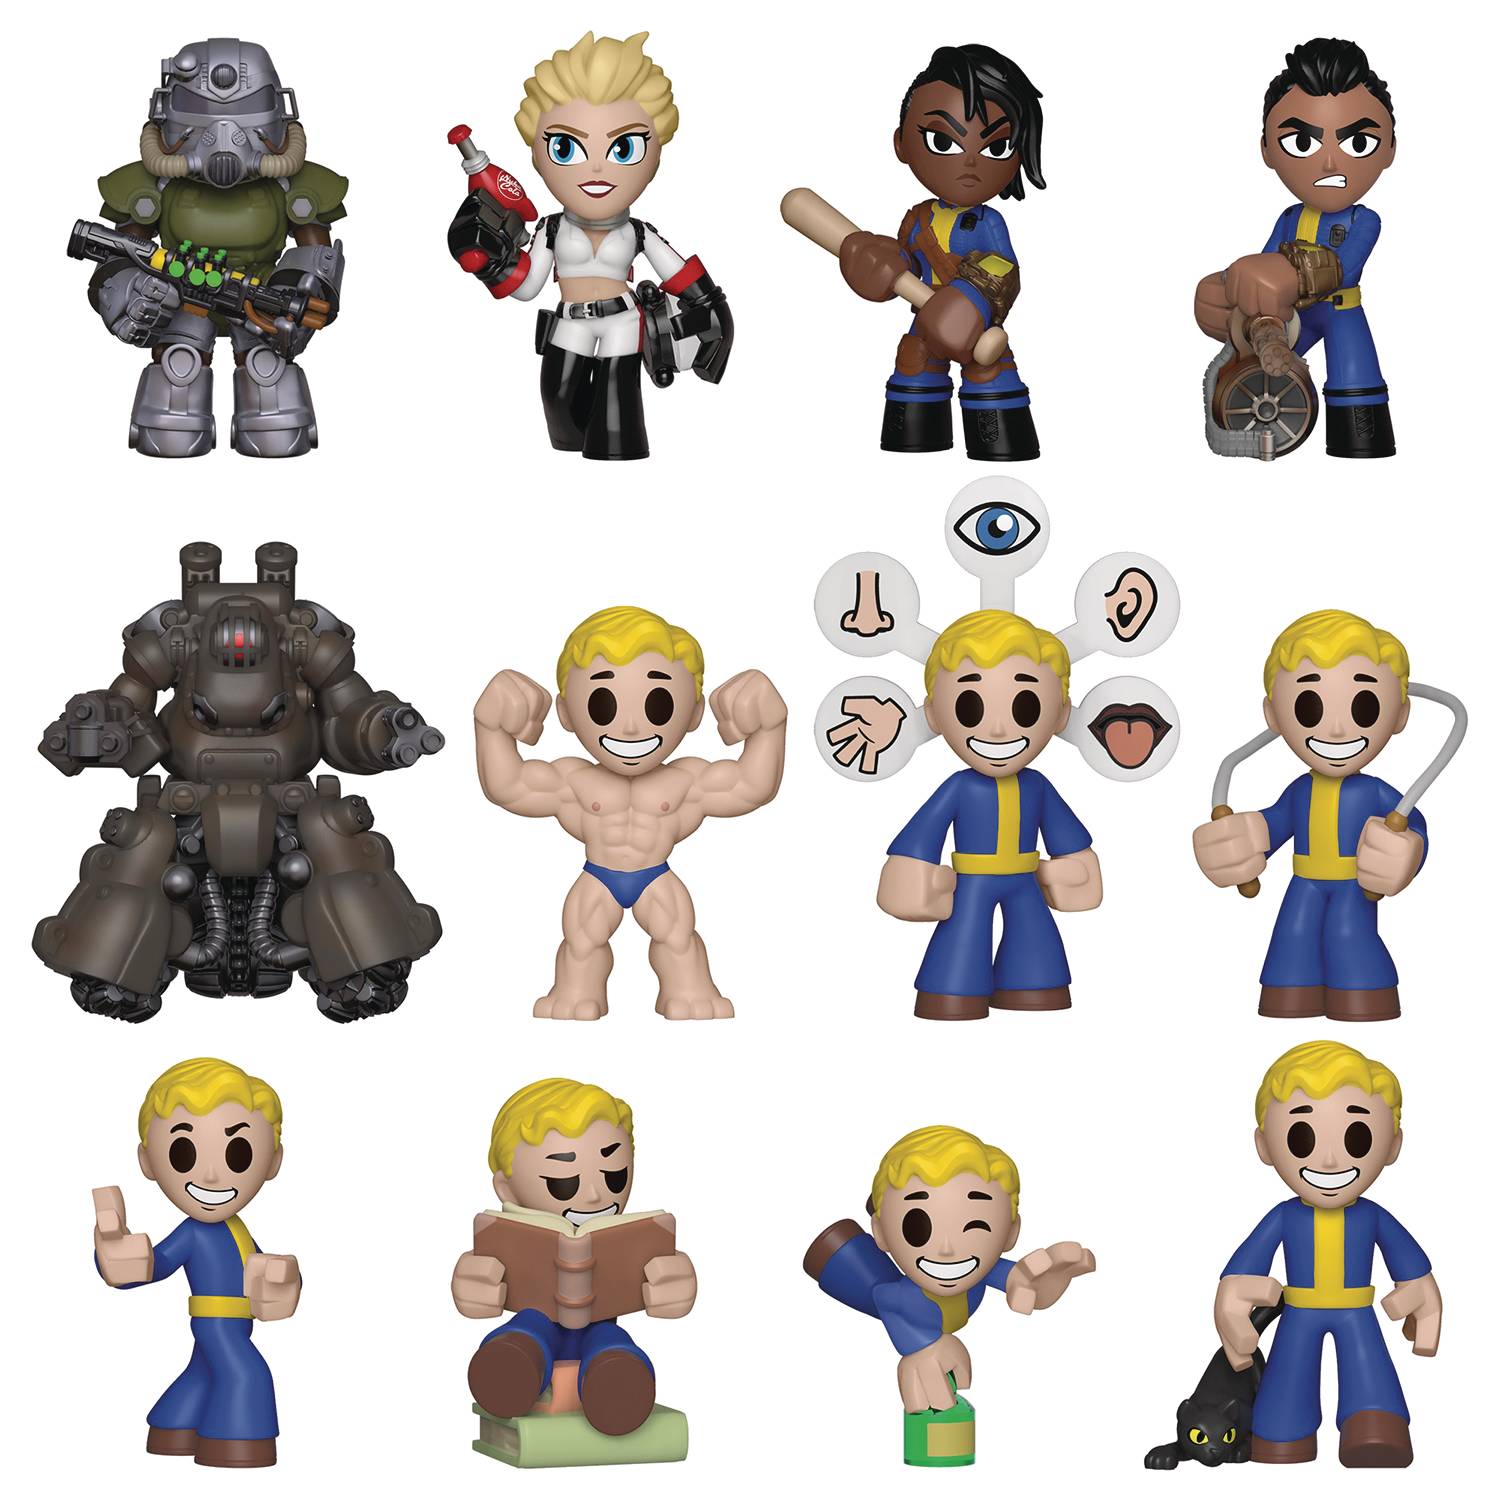 Mystery Minis Fallout S2 12 Piece Blind Mystery Box Display